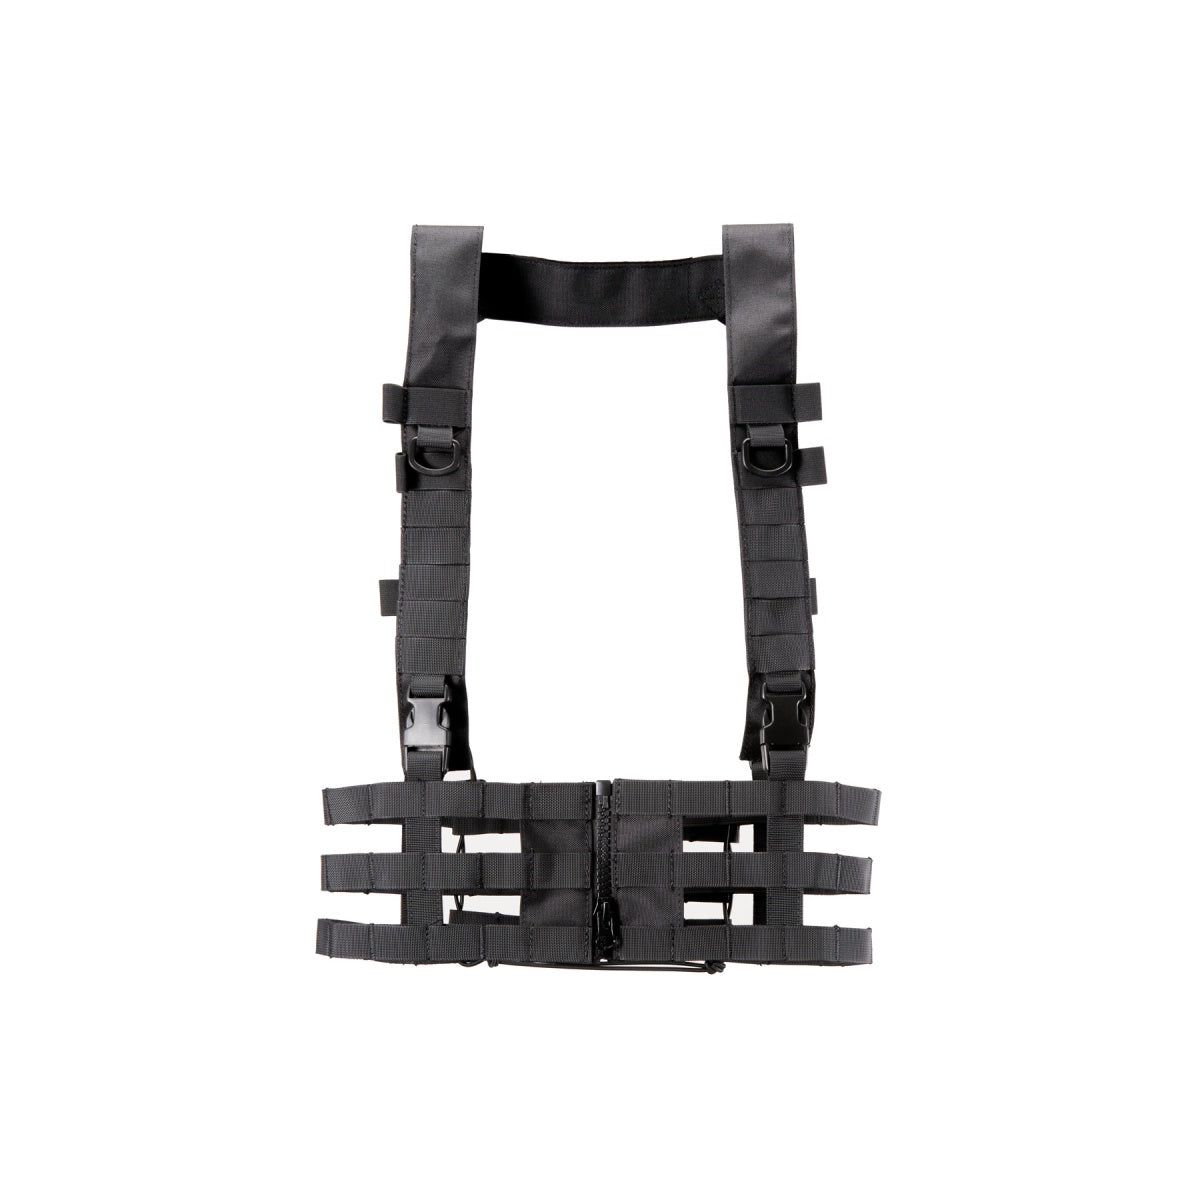 Valkyrie Low Profile MOLLE Platform Chest Rig